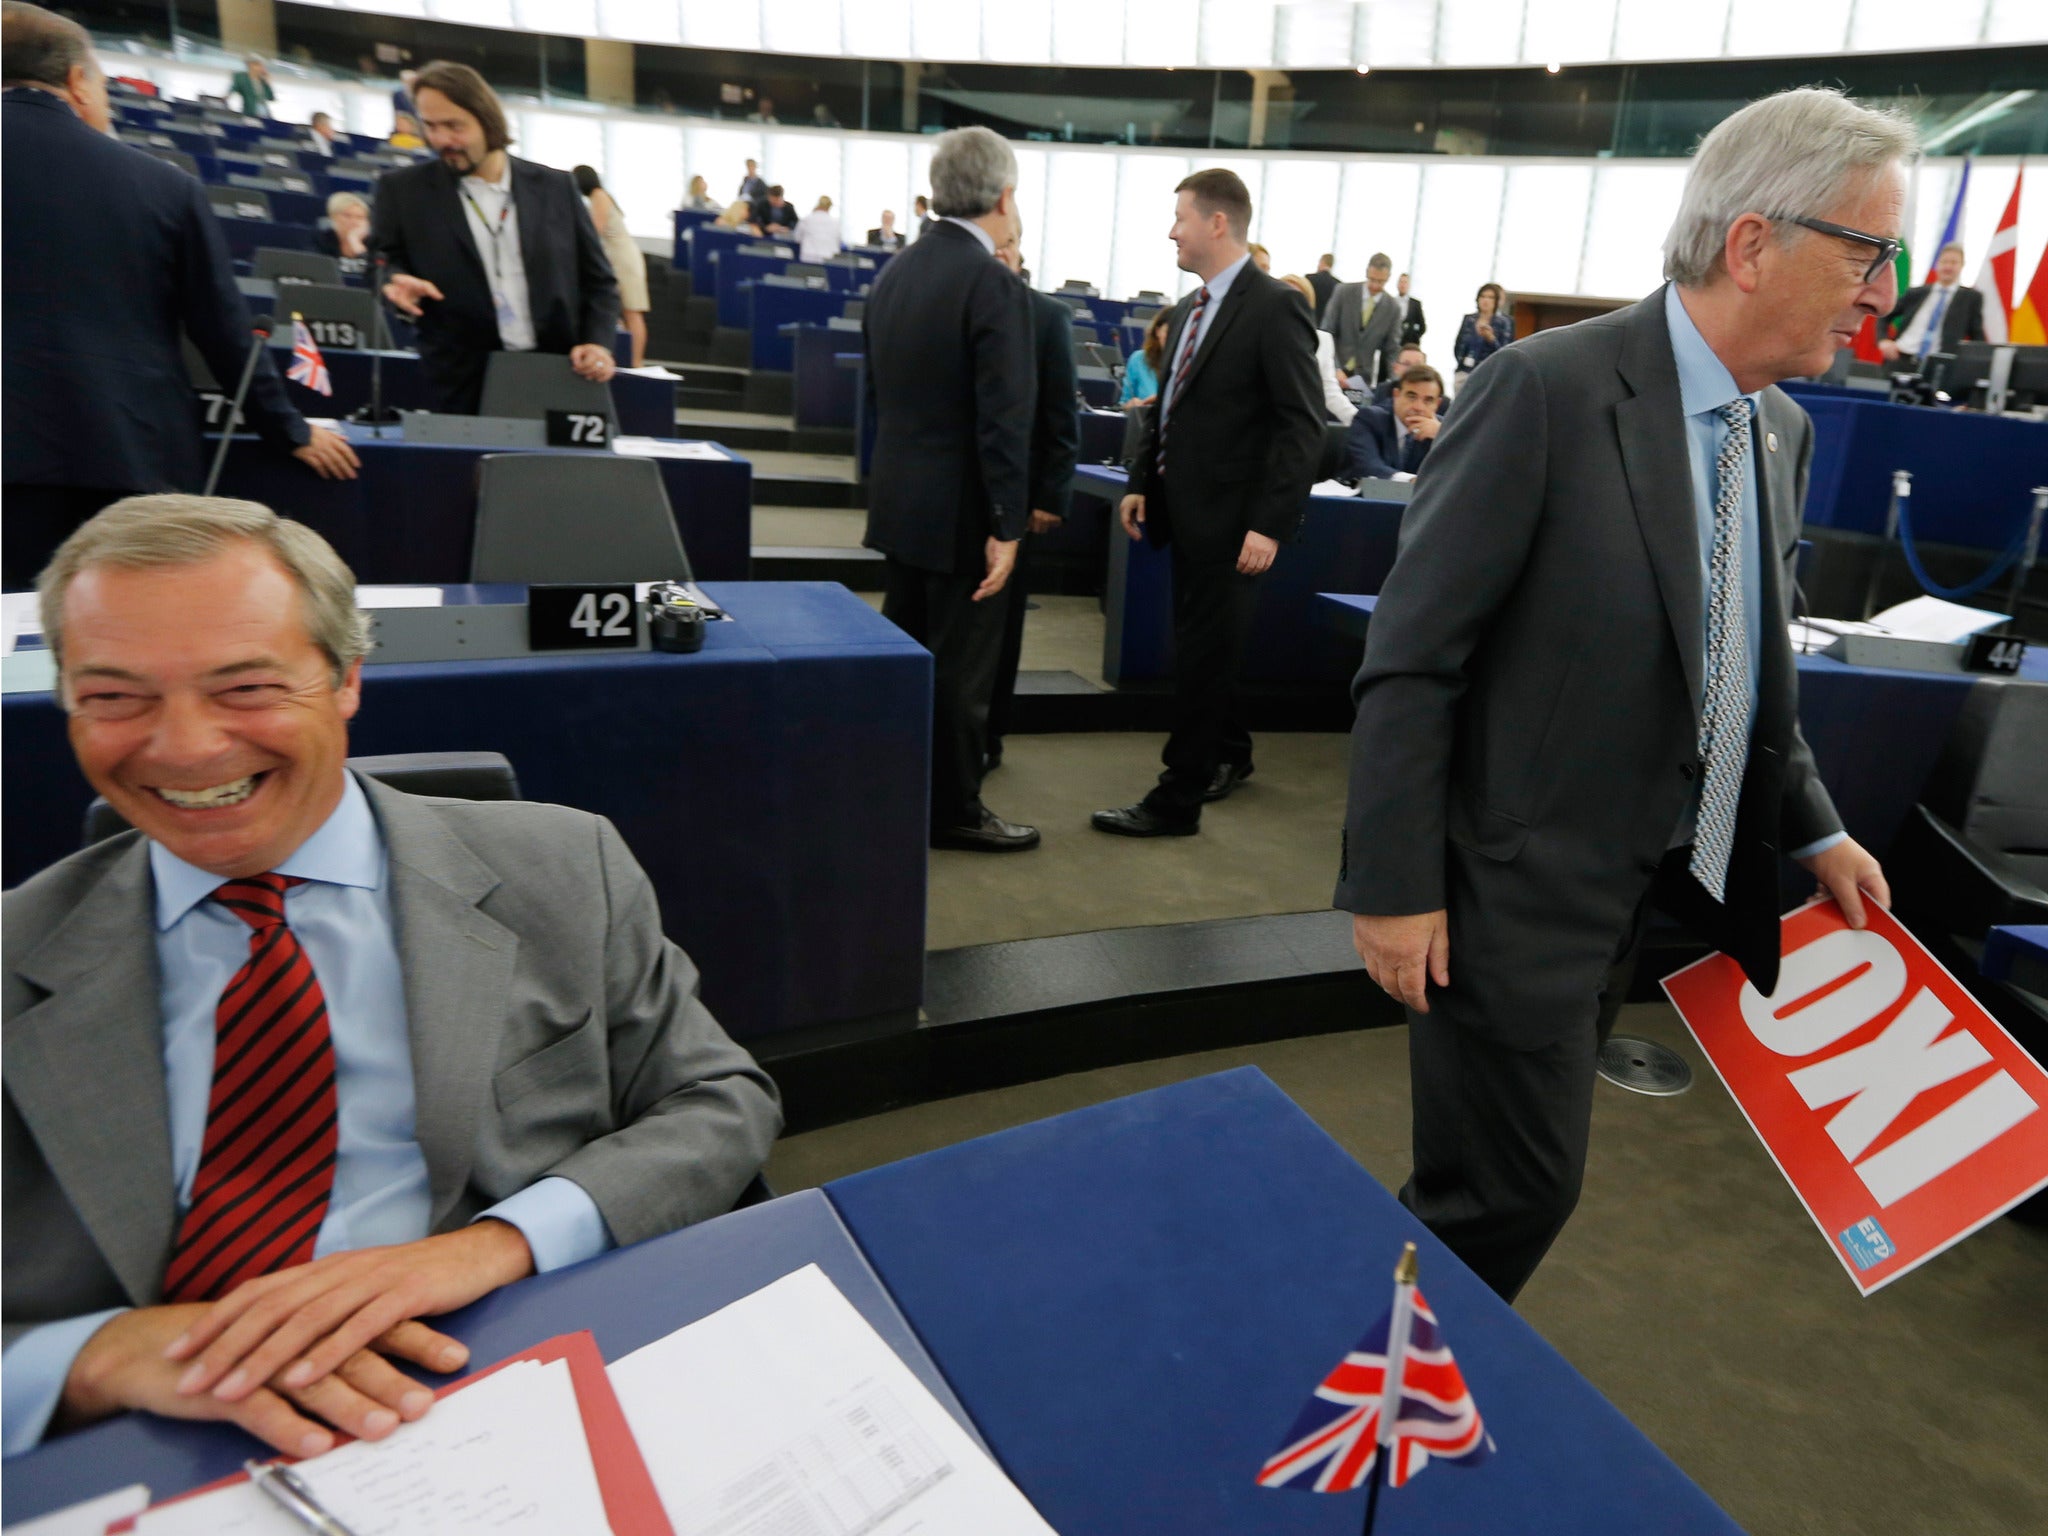 Farage kept the 'no' vote banner on his desk, until Commission president Junker confiscated it